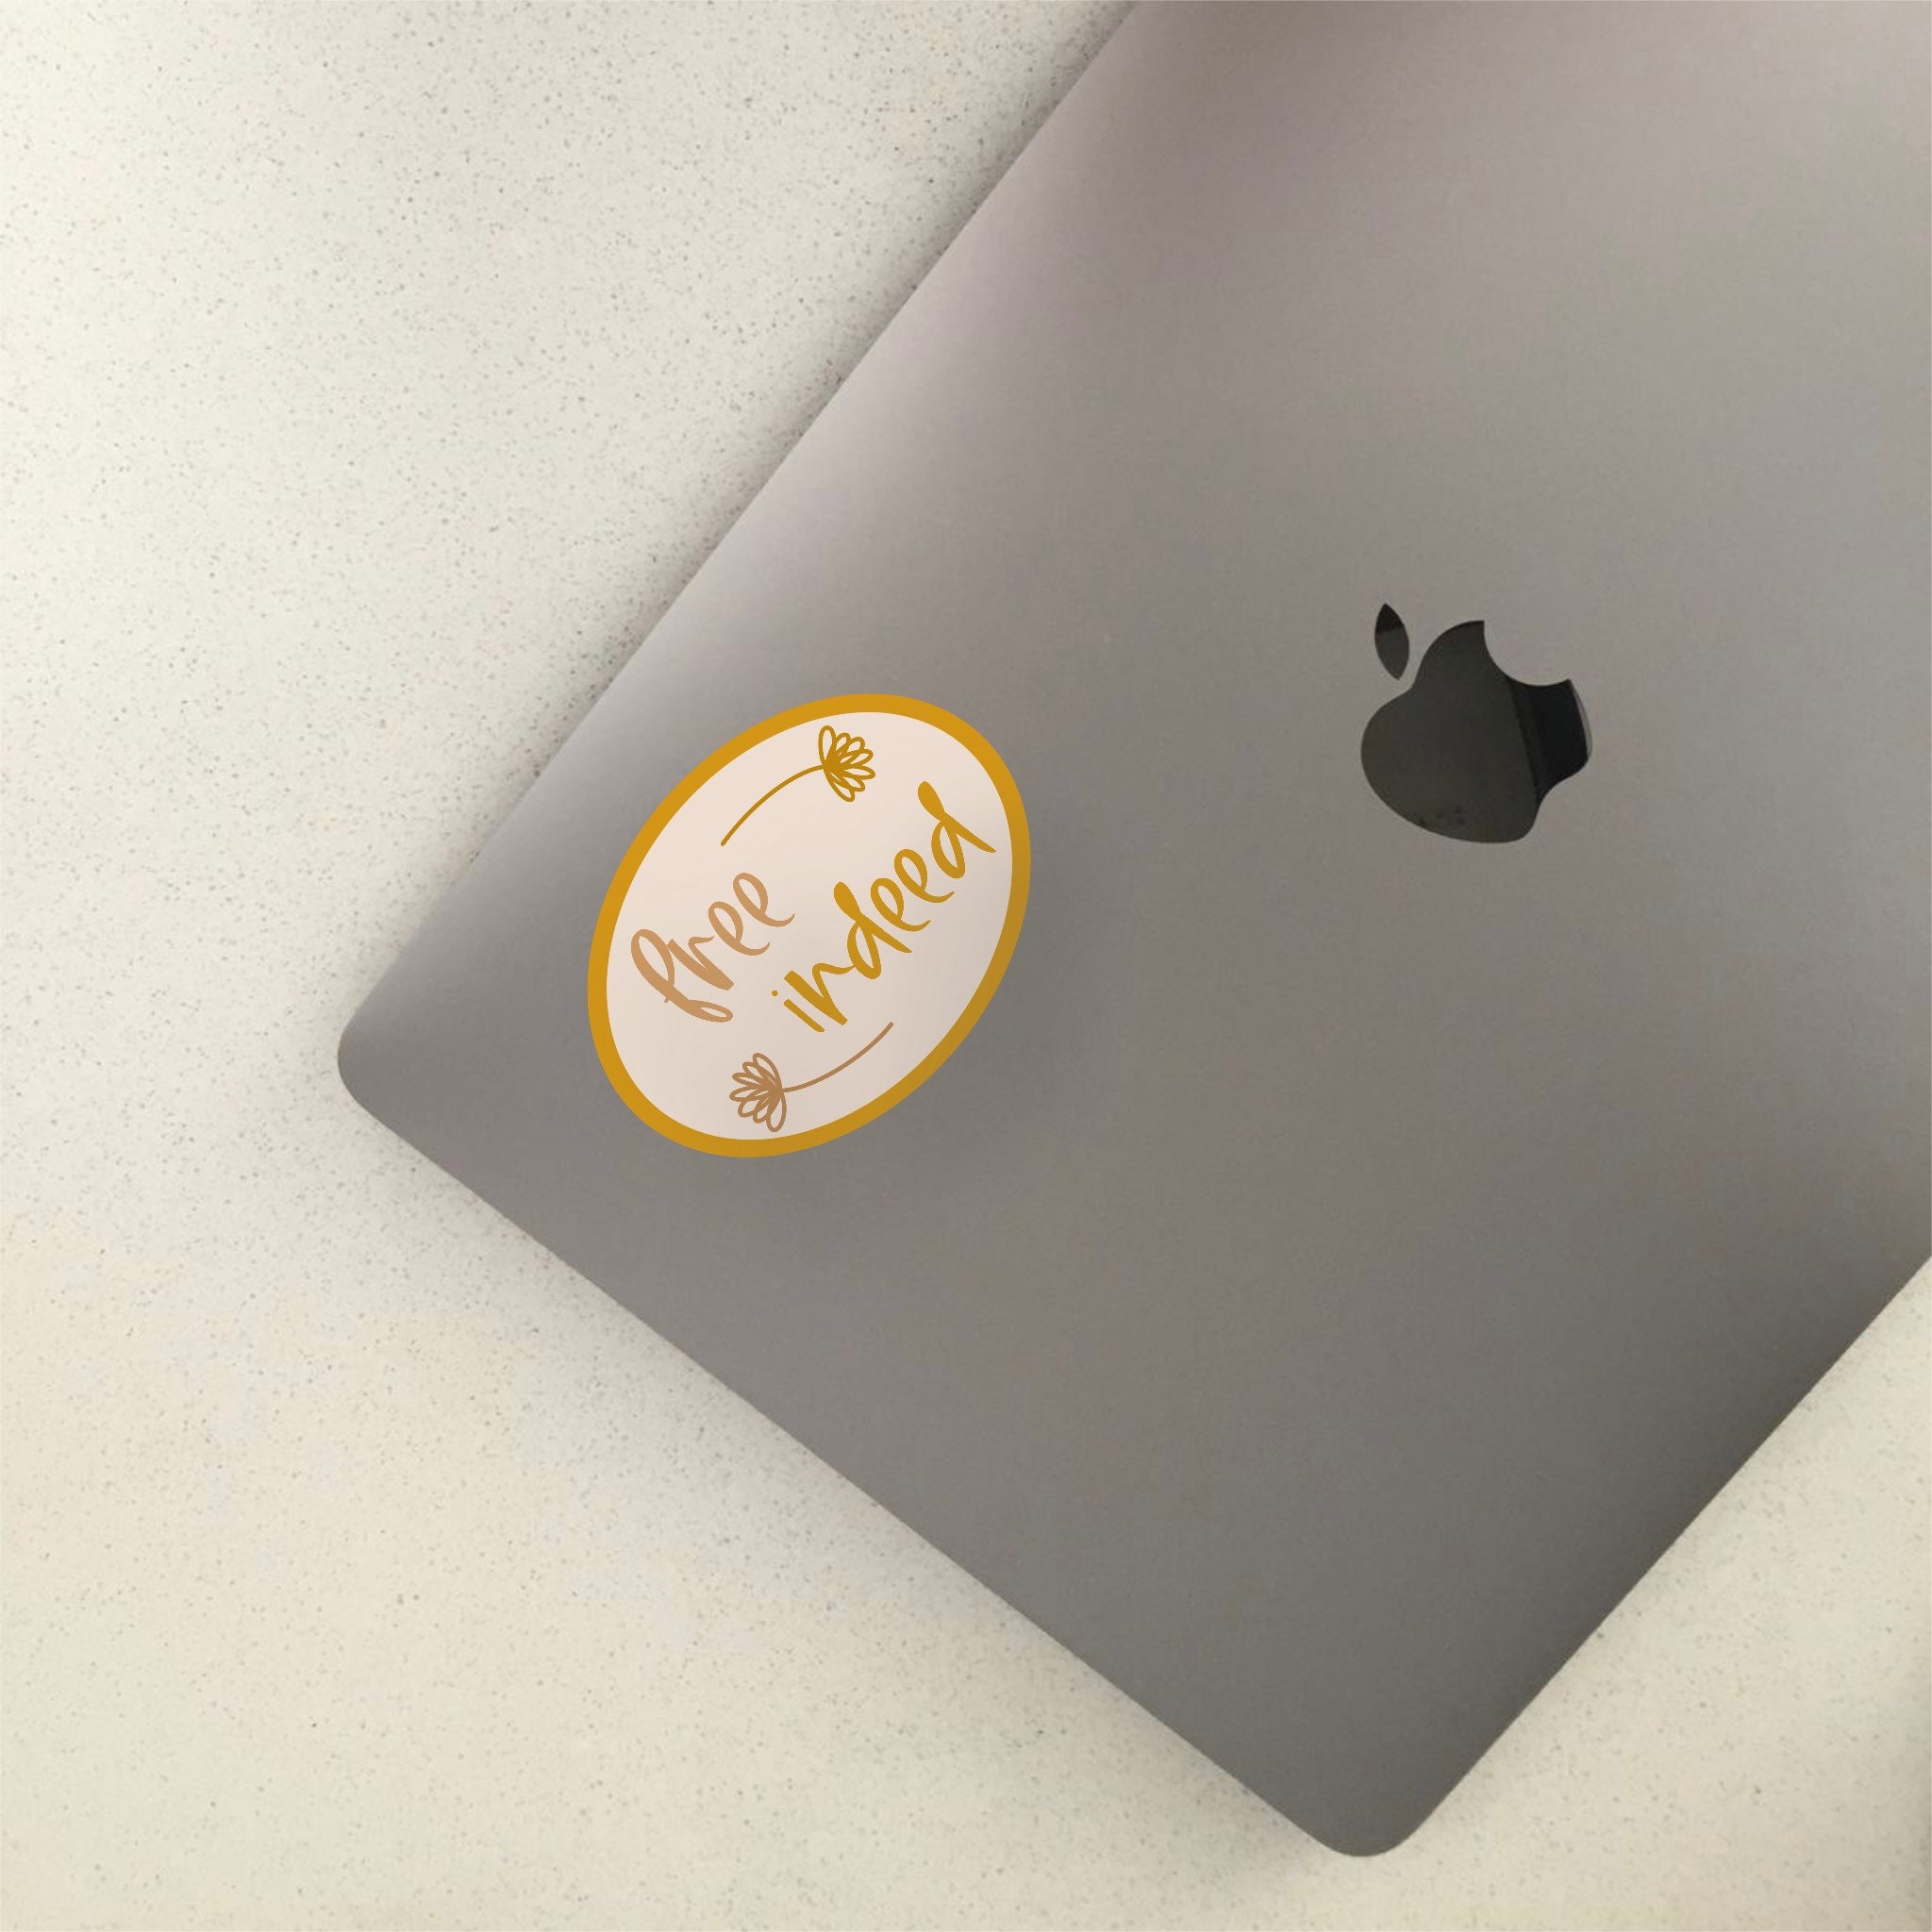 Free Indeed Monarch Bible verse sticker, Christian stickers